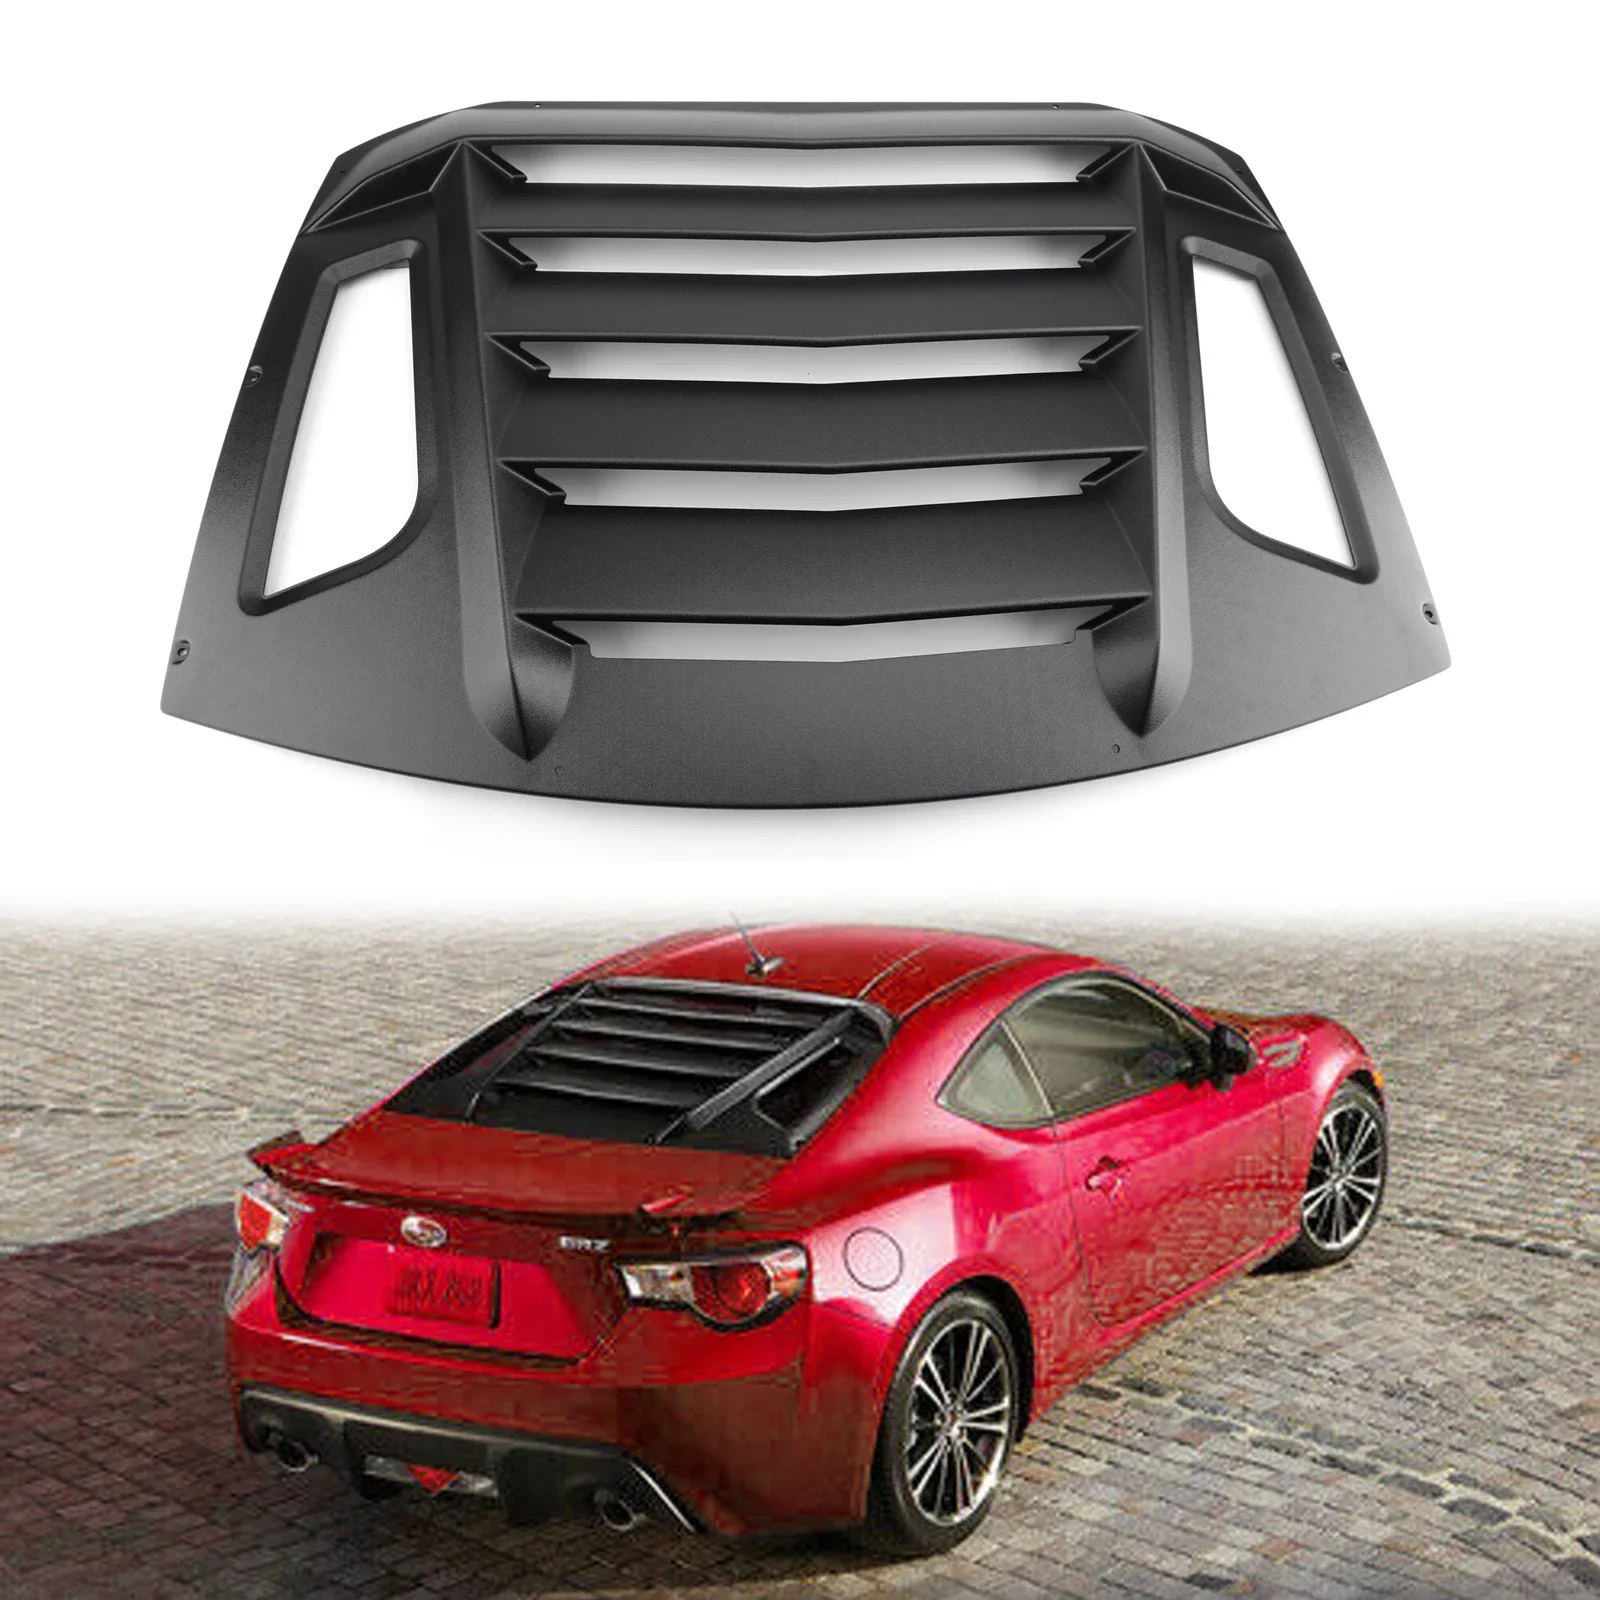 Areyourshop Rear Window Louver Sun Shade Cover For Subaru BRZ/Scion FR-S For  GT86 2013-2018 custom archaic car light side marker light for toyota 86 gt86 ft86 2022 2023 subaru brz scion frs fender sequential lamp indicator